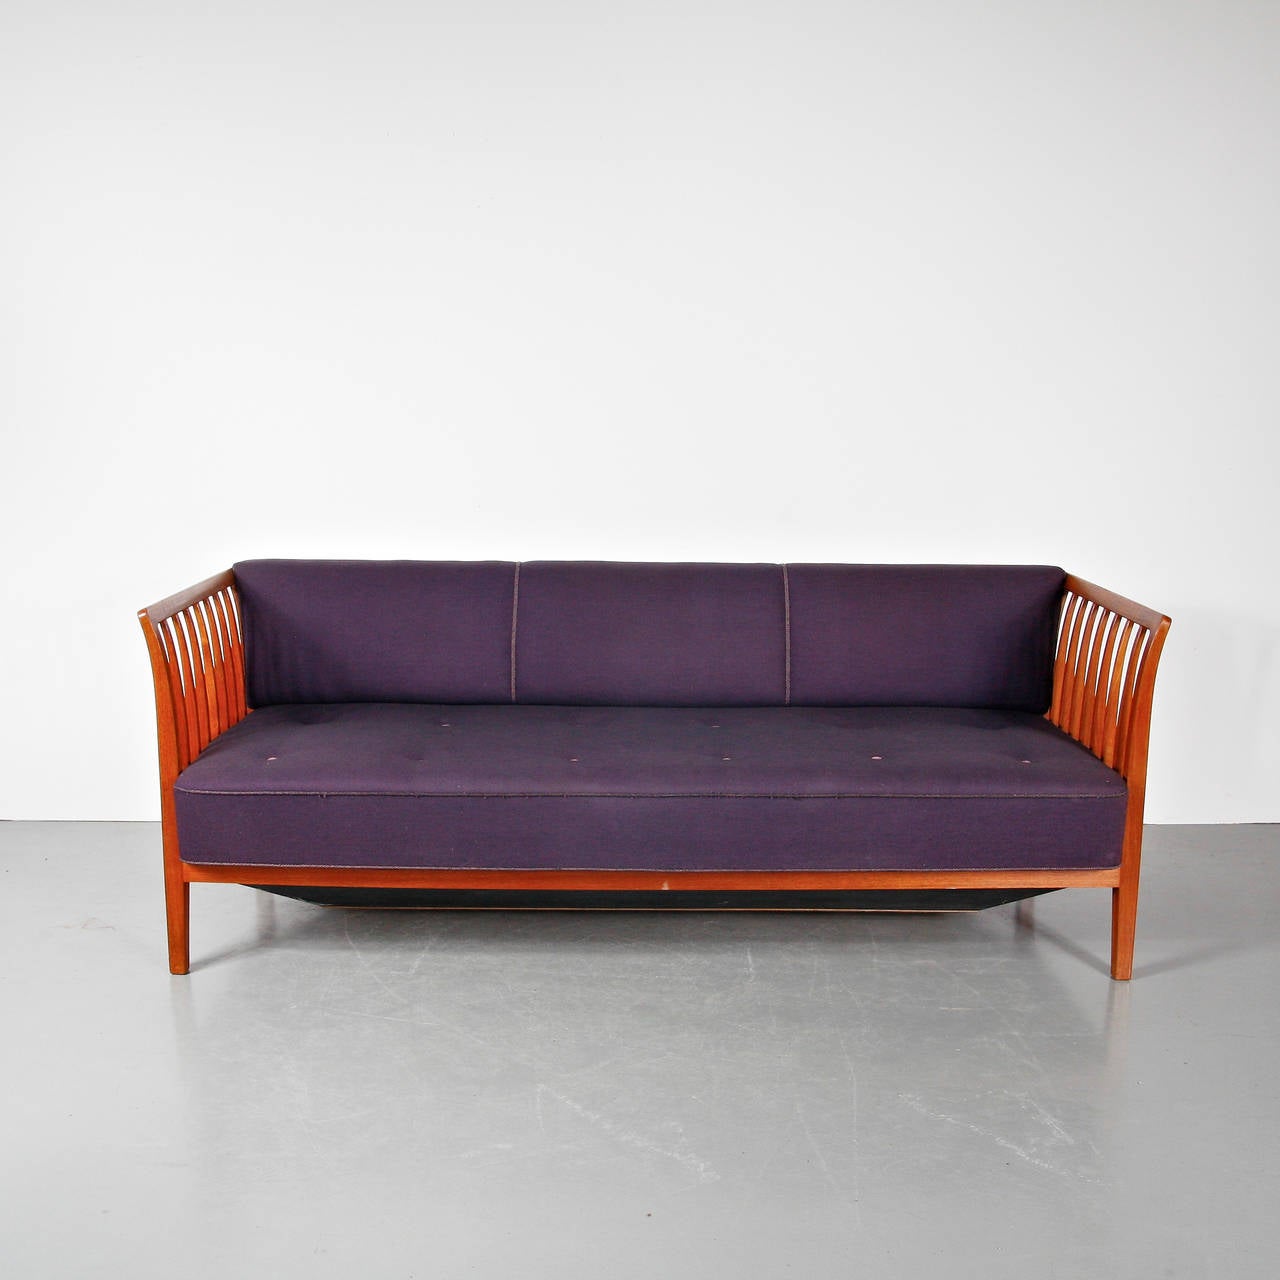 A rare, large sofa designed by Ludvig Pontoppidan, manufactured in Denmark around 1940 by himself.

This eye-catching sofa has a wonderful warm brown wooden frame with spokes in the armrests creating an amazing appearance. It has a nice, deep seat